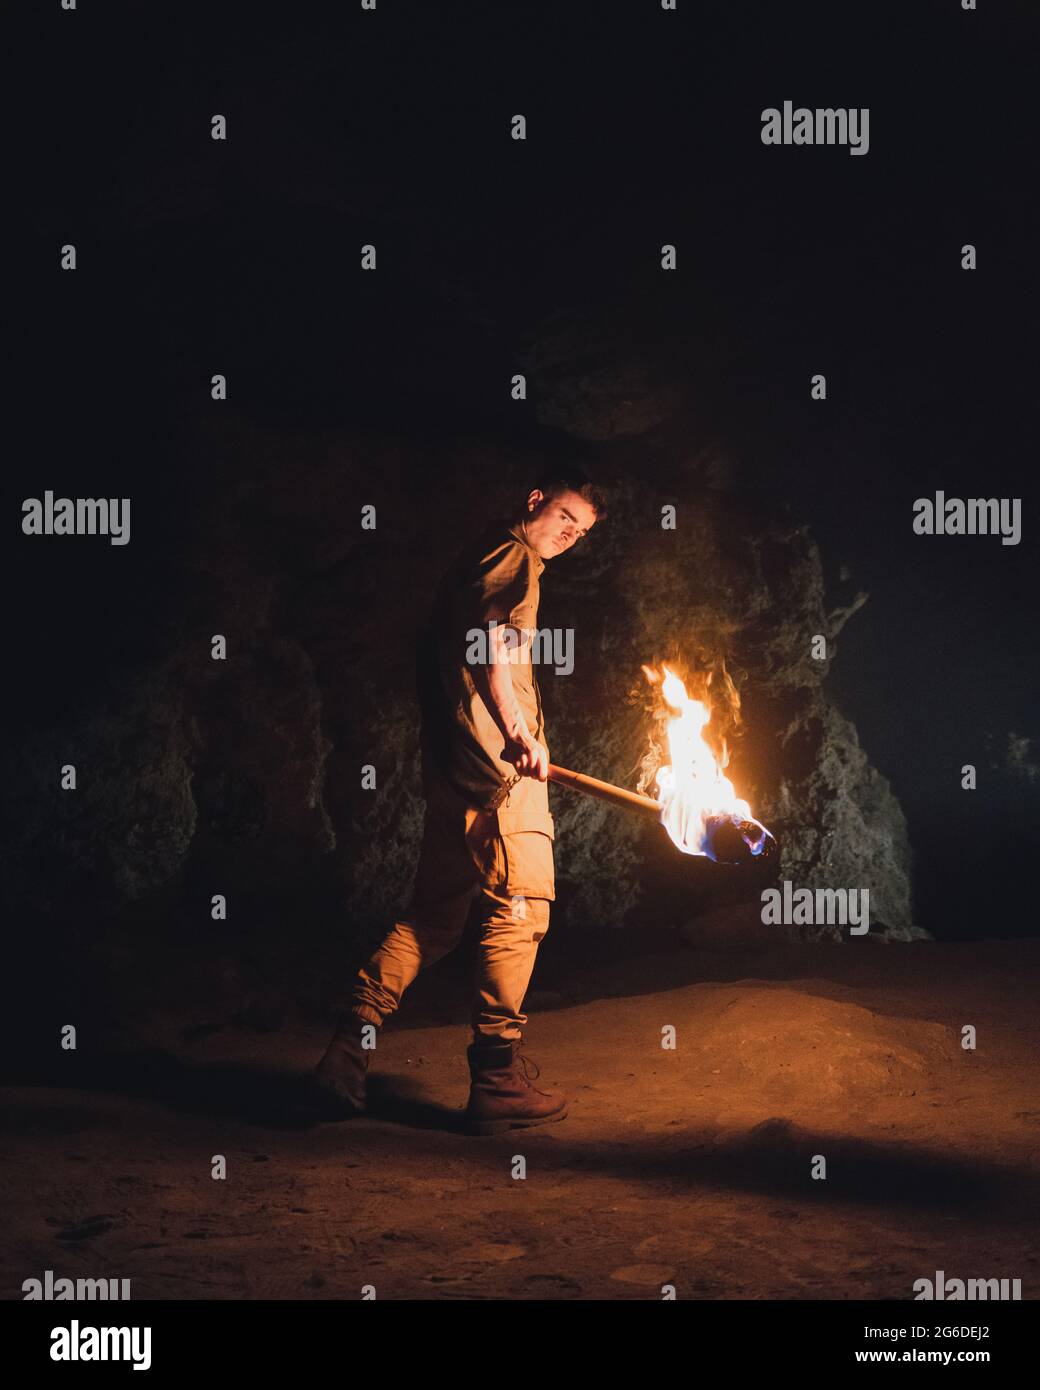 Side view of young male speleologist with flaming torch standing in dark narrow rocky cave while exploring subterranean environment Stock Photo